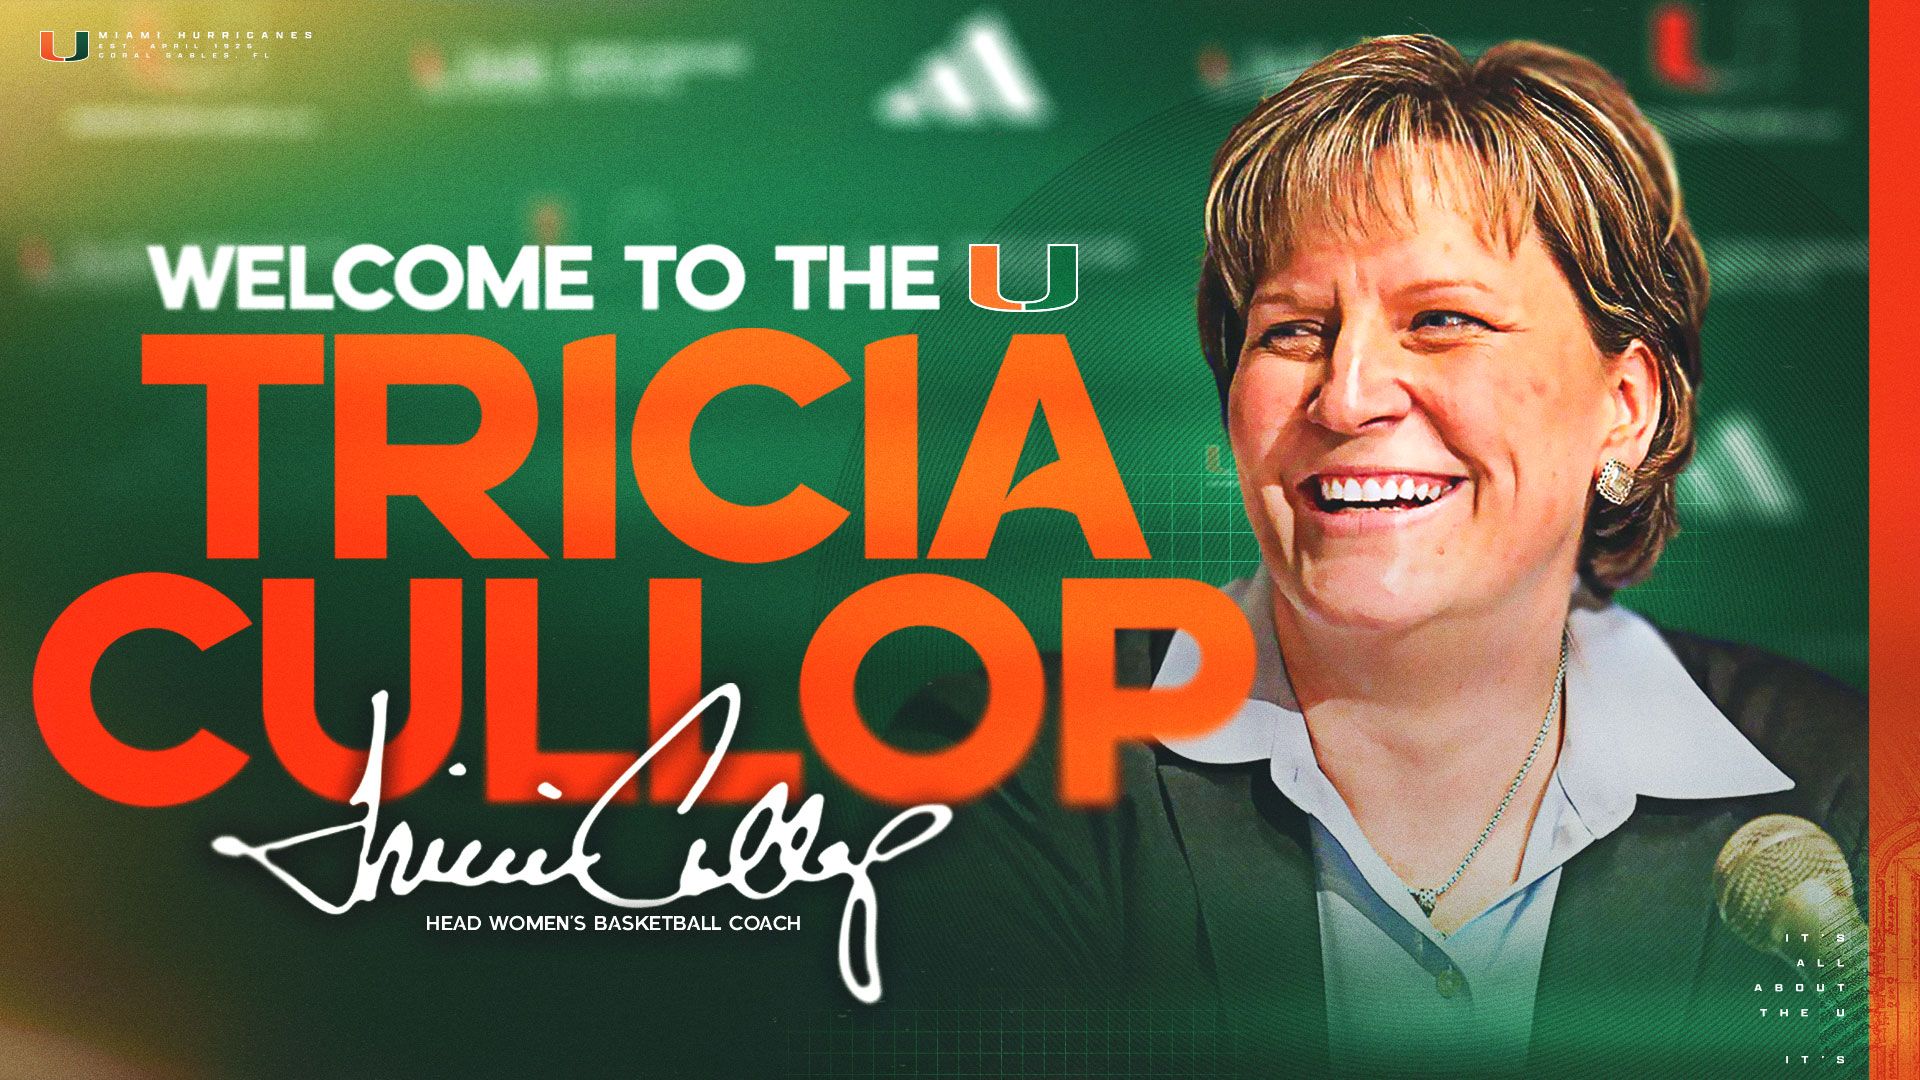 University of Miami Hires Tricia Cullop as Head Women’s Basketball Coach